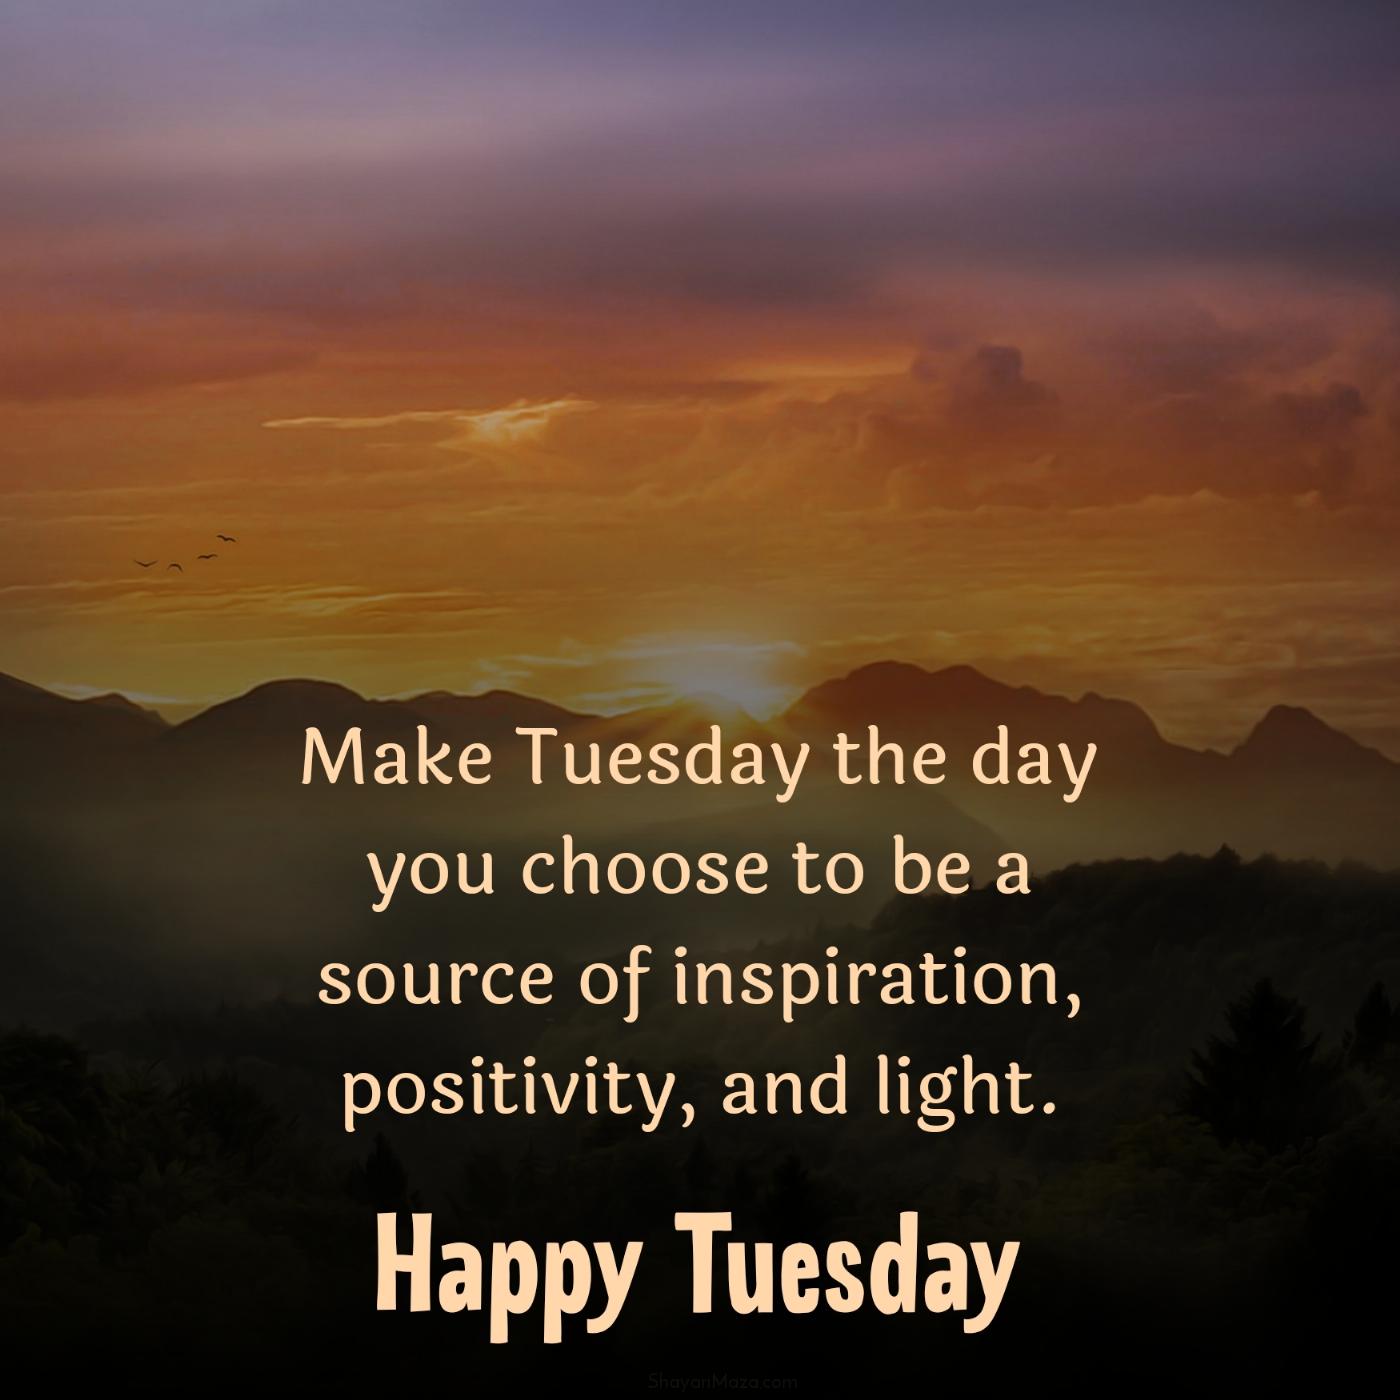 Make Tuesday the day you choose to be a source of inspiration